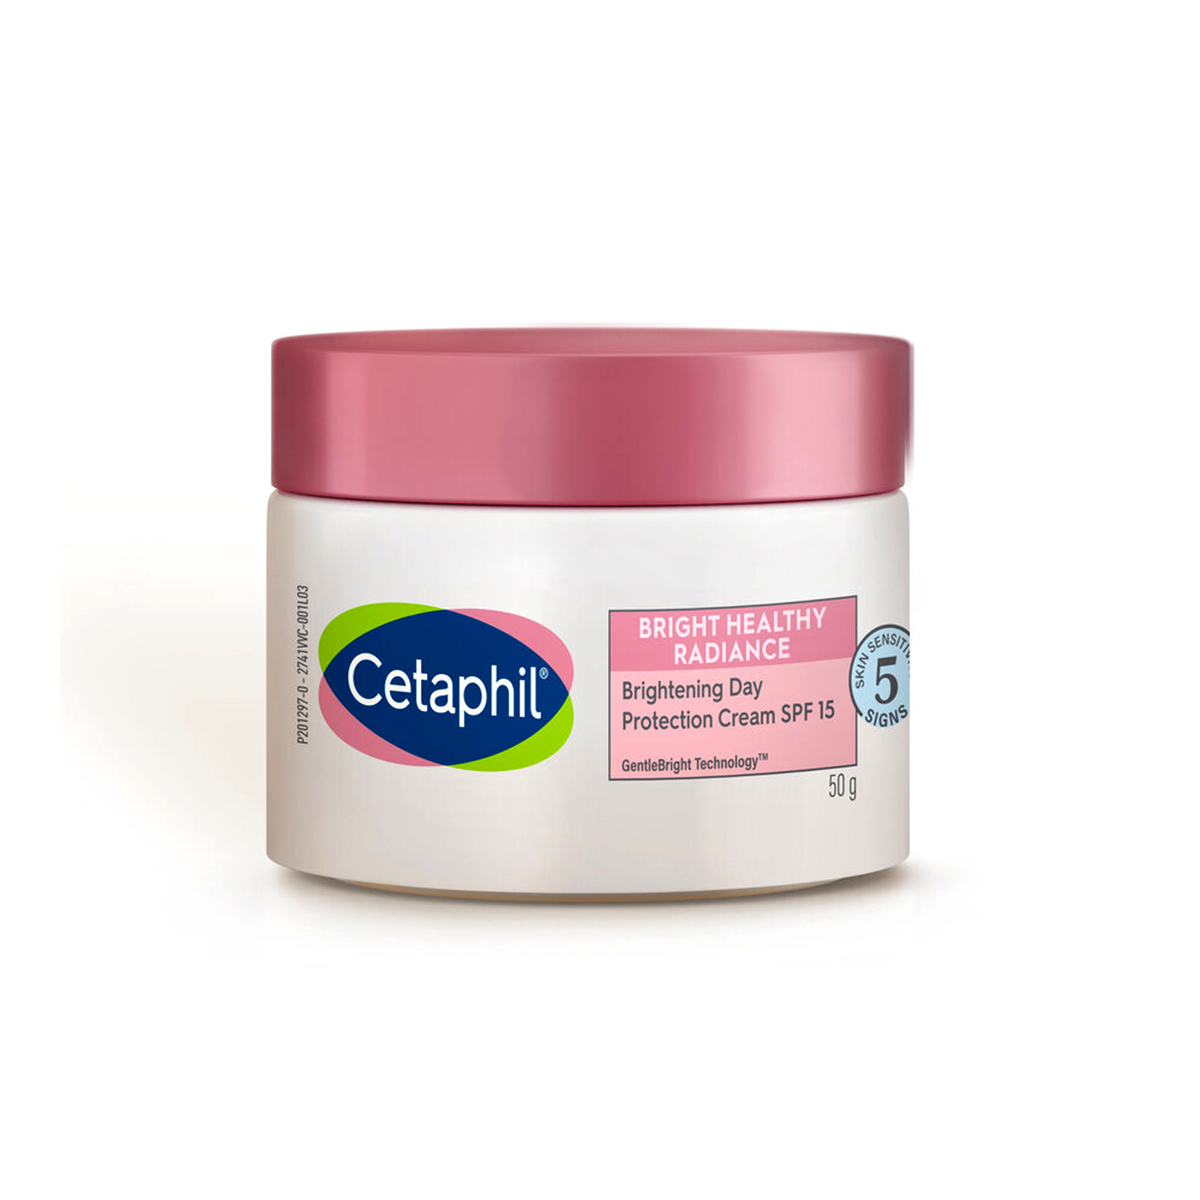 First product image of Cetaphil Brightening Day Protection Cream SPF15 50g